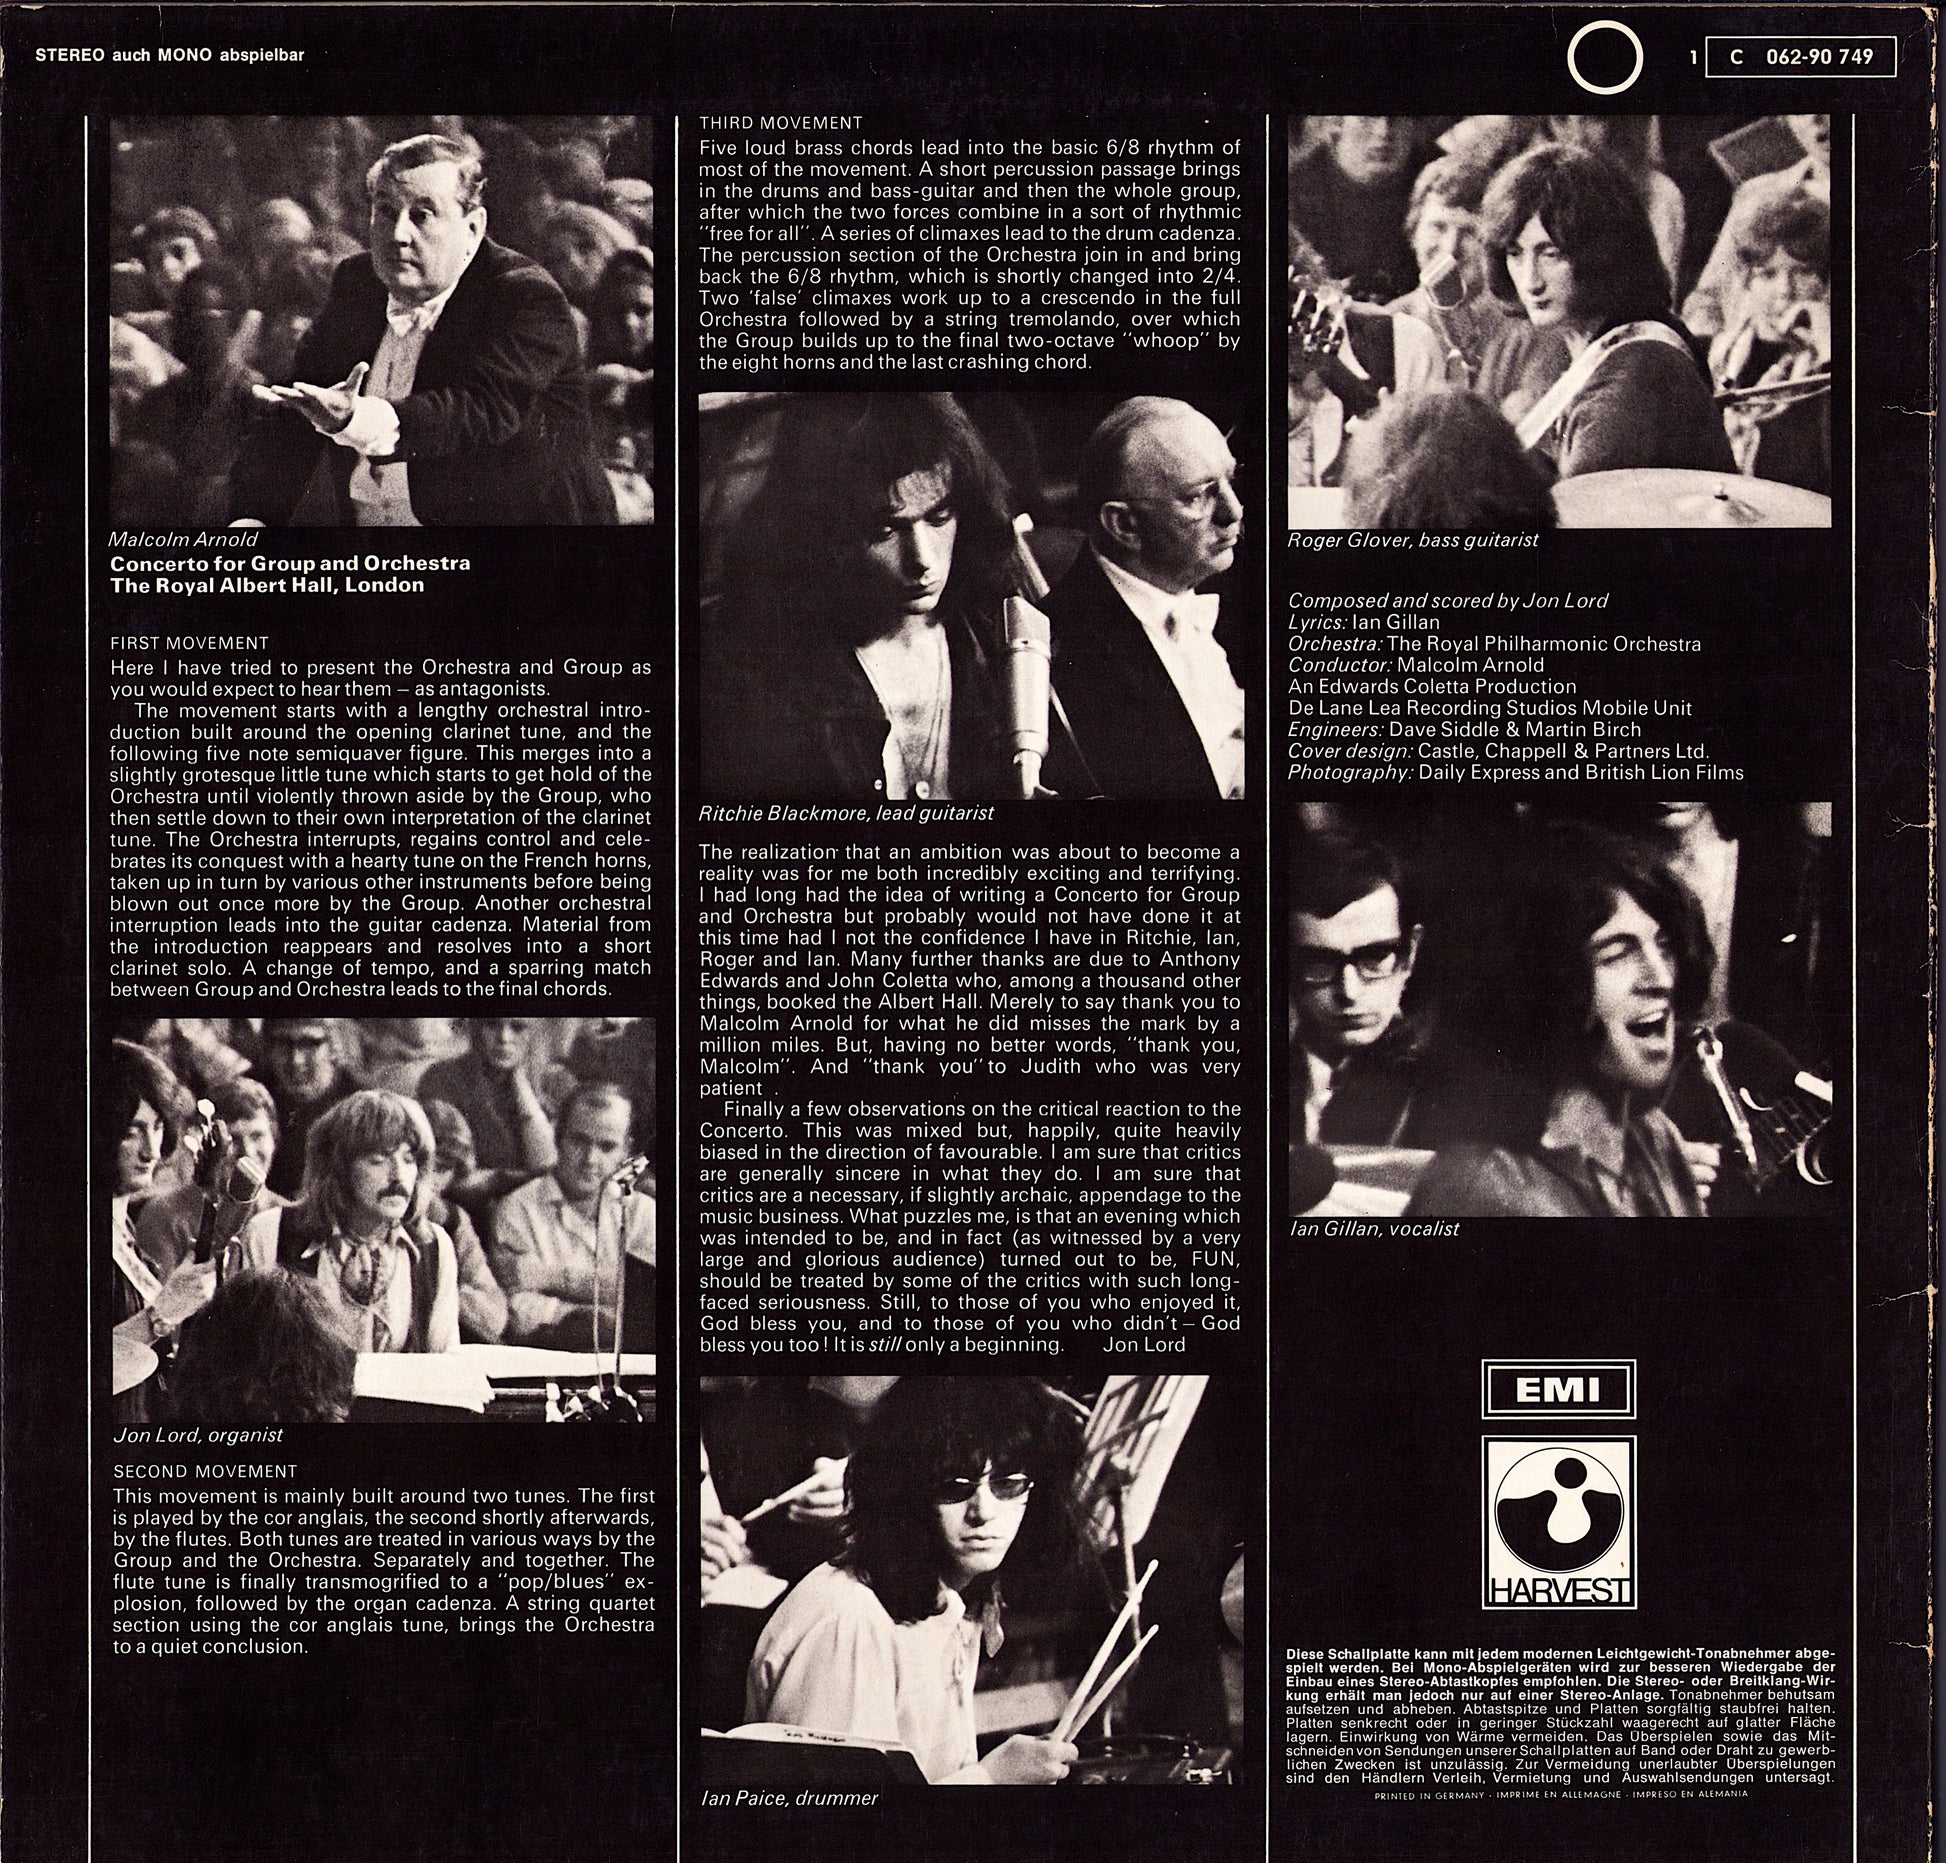 Deep Purple, The Royal Philharmonic Orchestra Conducted by Malcolm Arnold ‎- Concerto For Group And Orchestra Vinyl LP